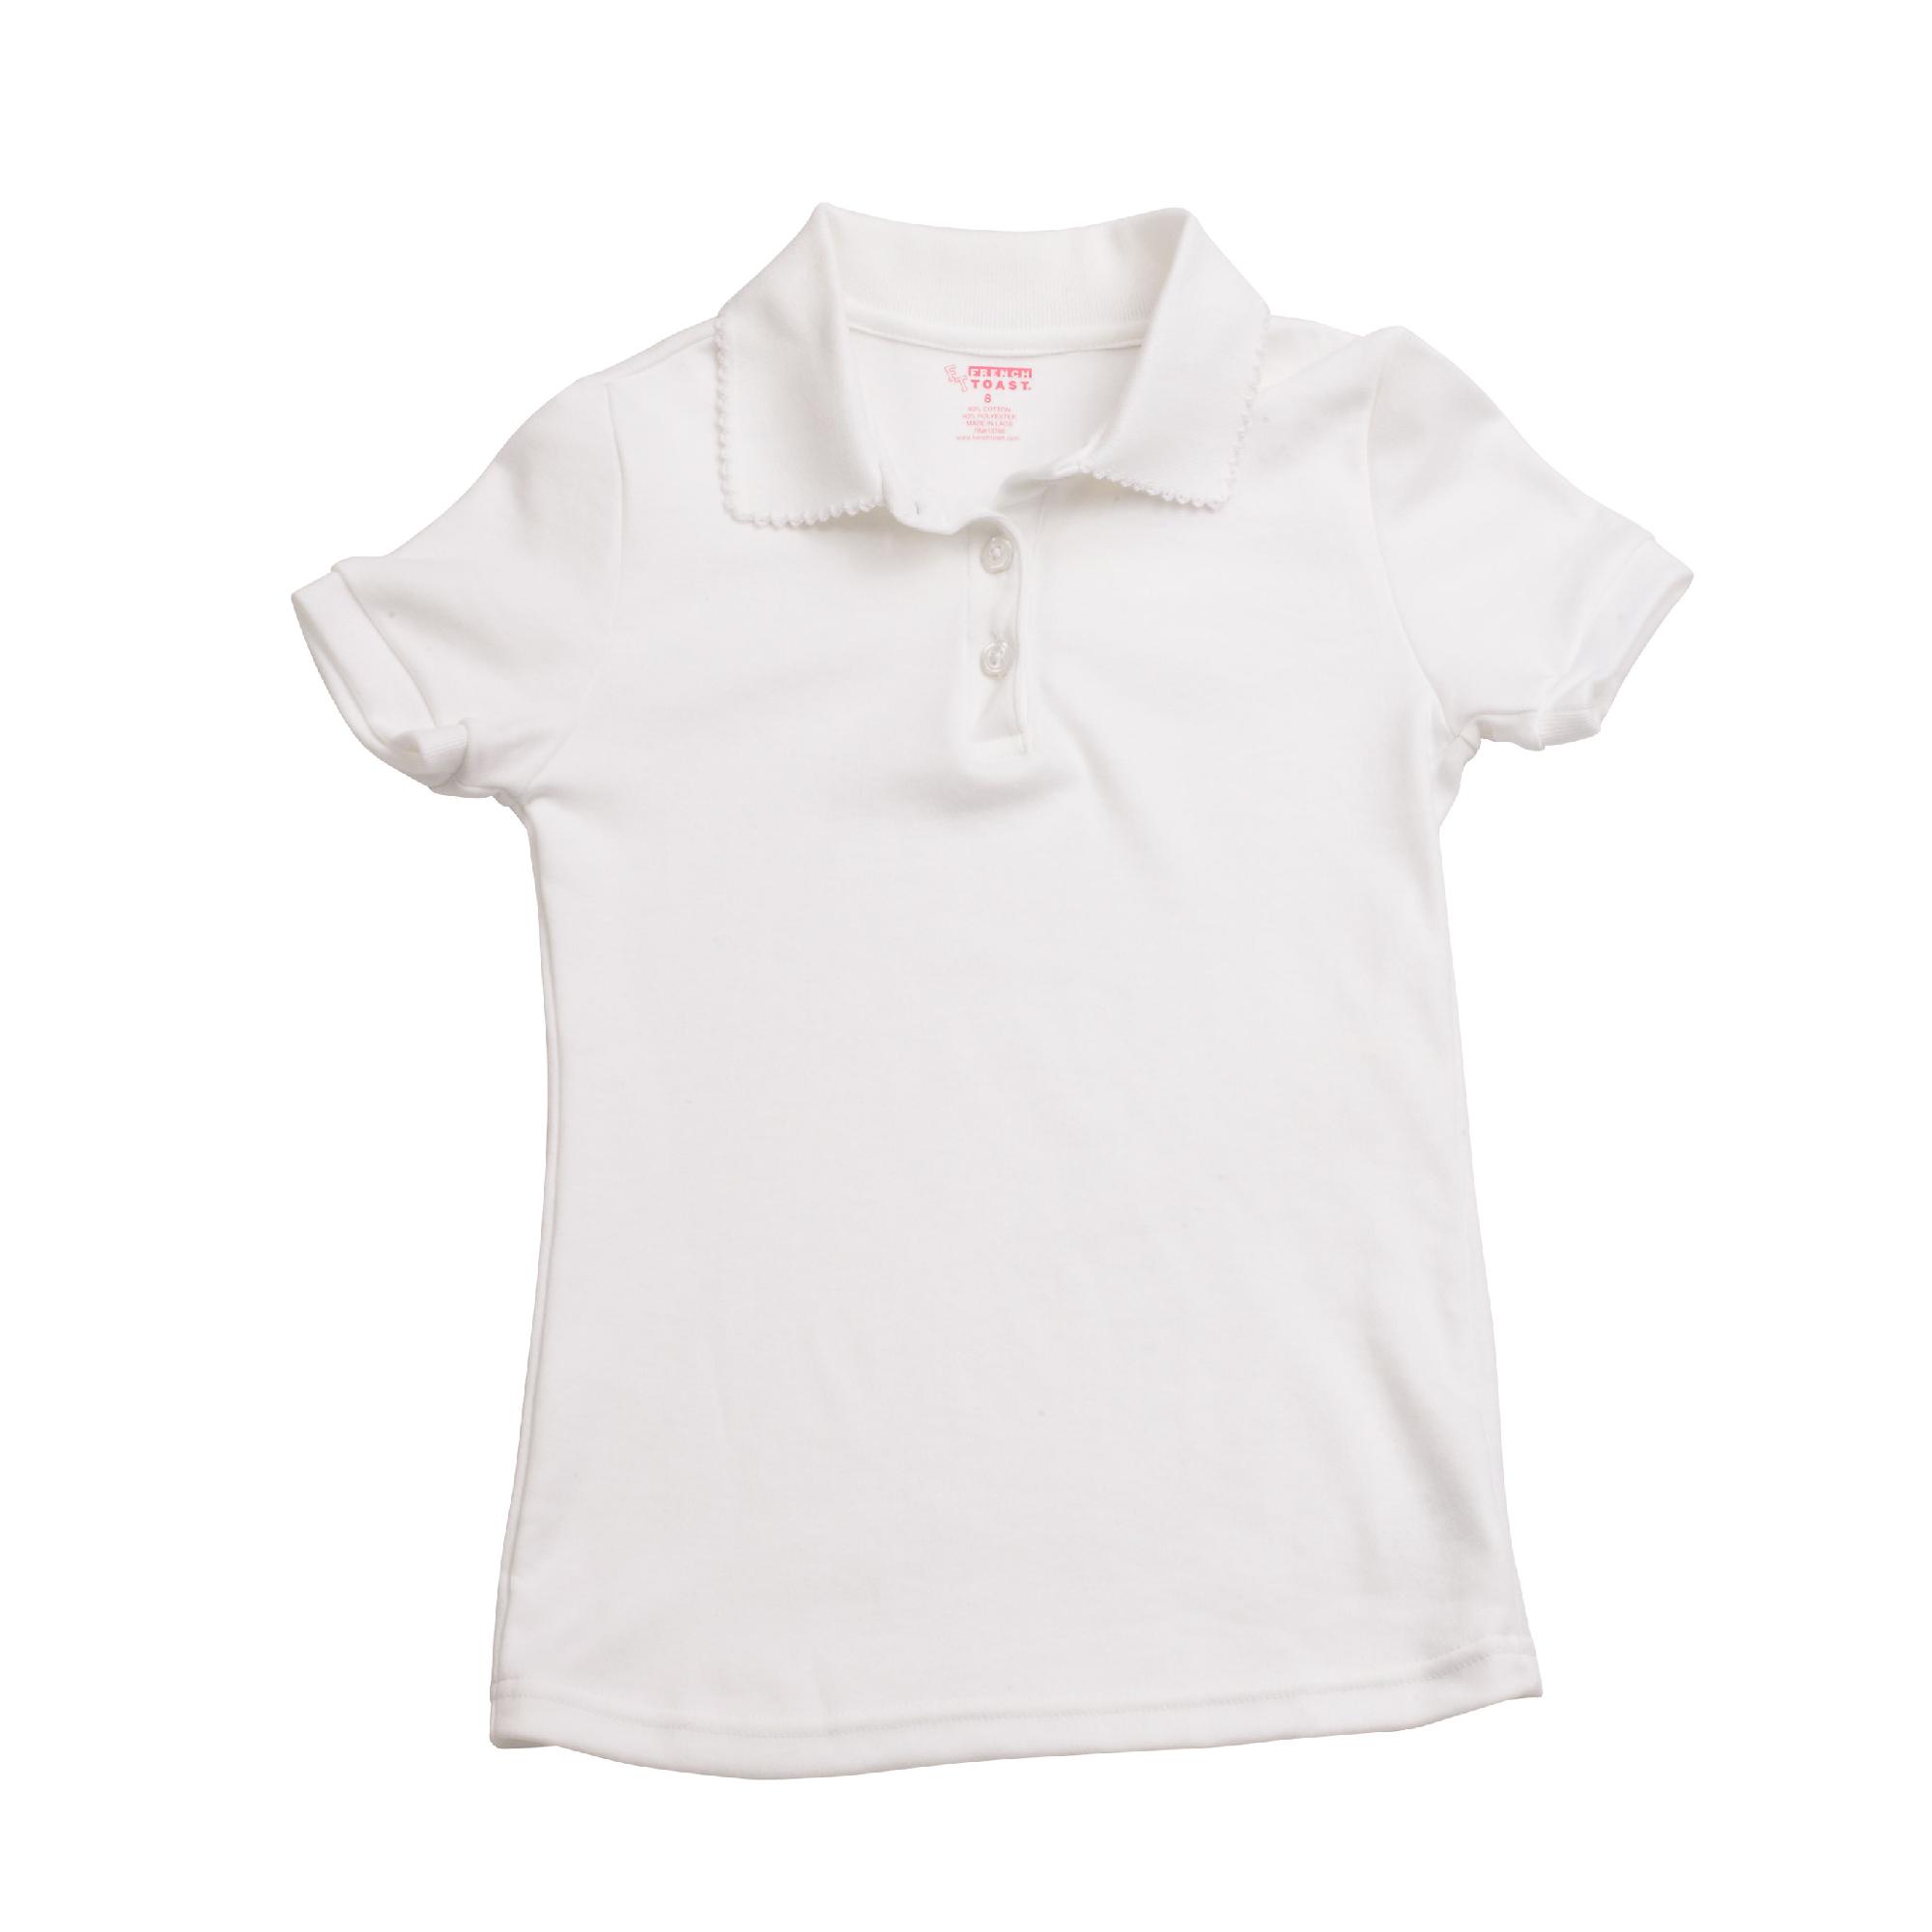 Toddler Short Sleeve Interlock Polo With Picot Collar